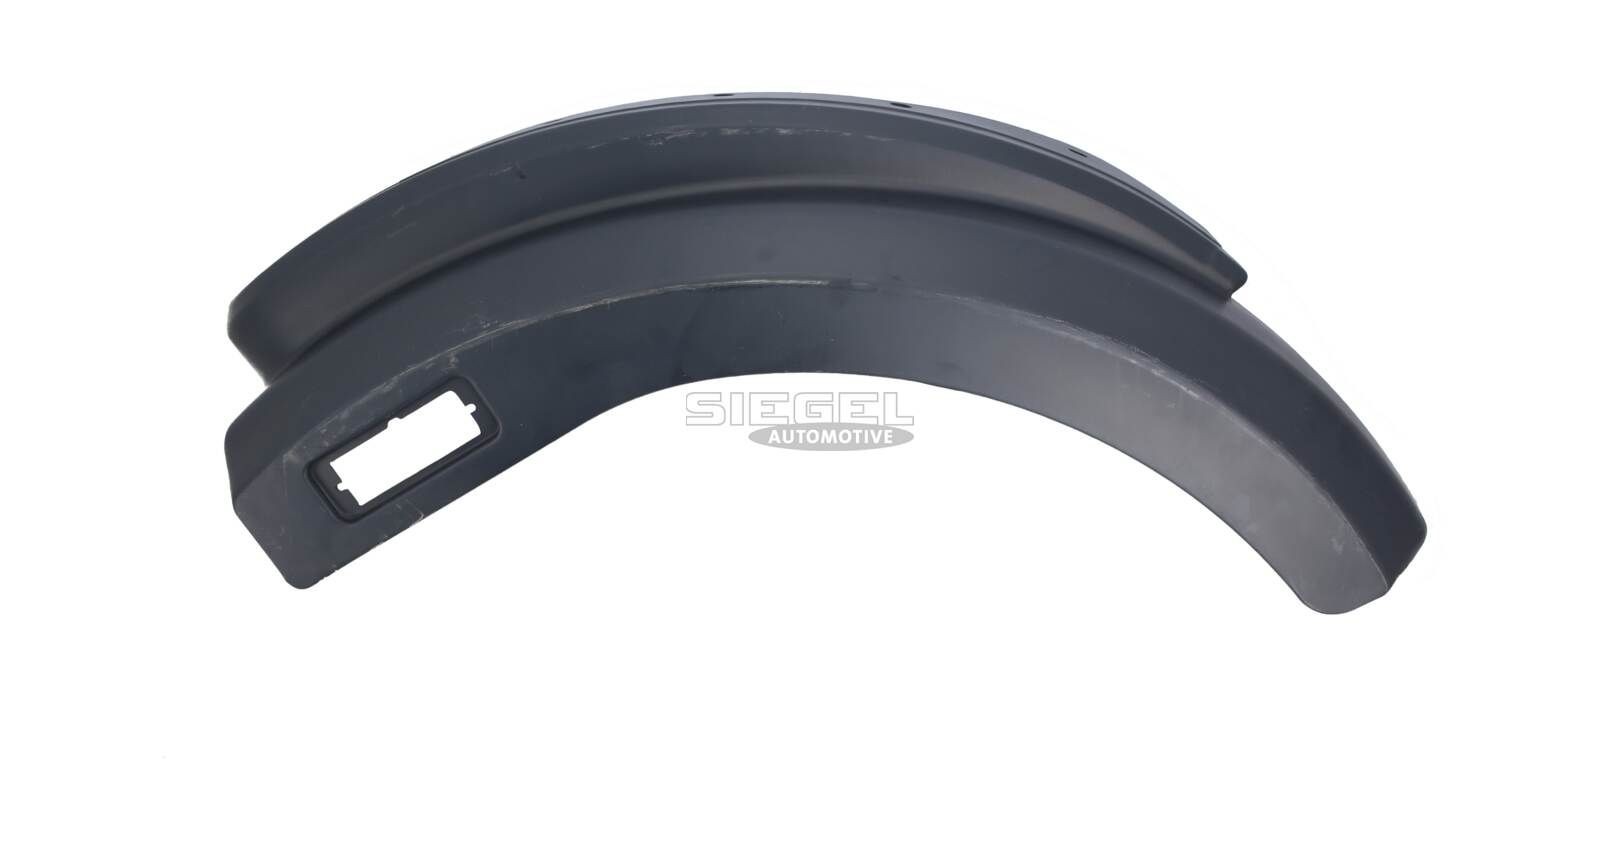 Fender SIEGEL AUTOMOTIVE Right Rear, Right Front - SA2D0681